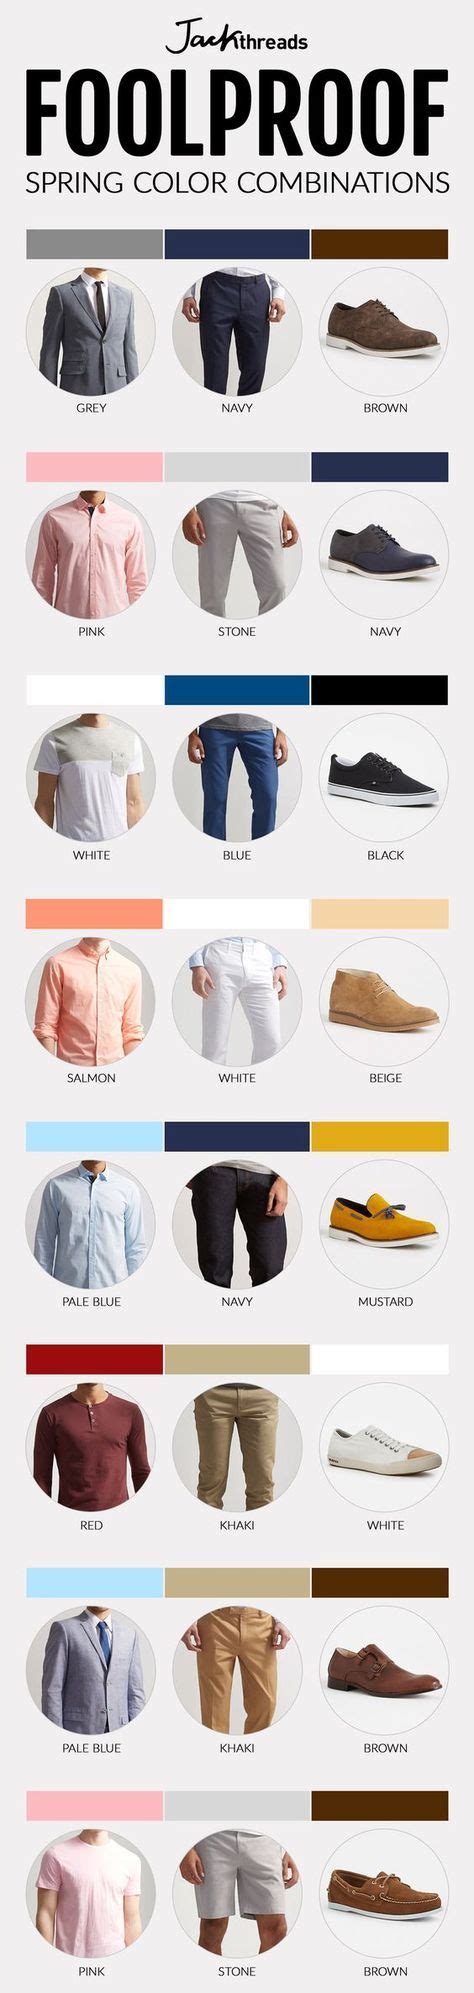 Mens Guide To Matching Pant Shirt Color Combination Looksgud Com